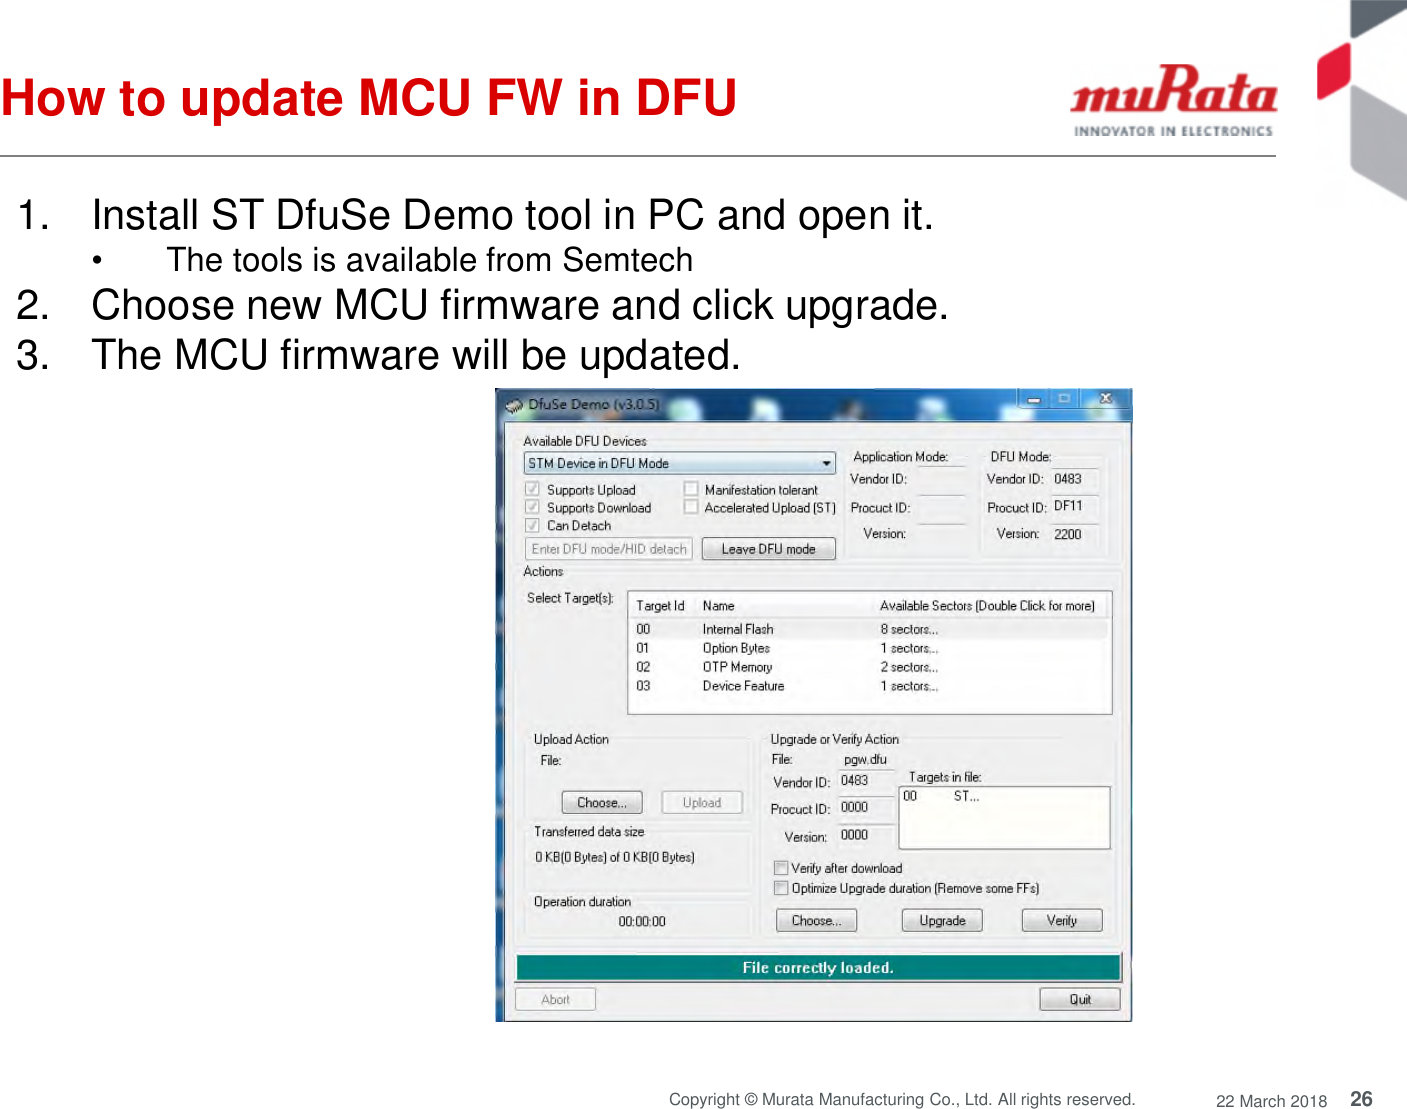 26Copyright © Murata Manufacturing Co., Ltd. All rights reserved. 22 March 2018How to update MCU FW in DFU1. Install ST DfuSe Demo tool in PC and open it.• The tools is available from Semtech2. Choose new MCU firmware and click upgrade.3. The MCU firmware will be updated.